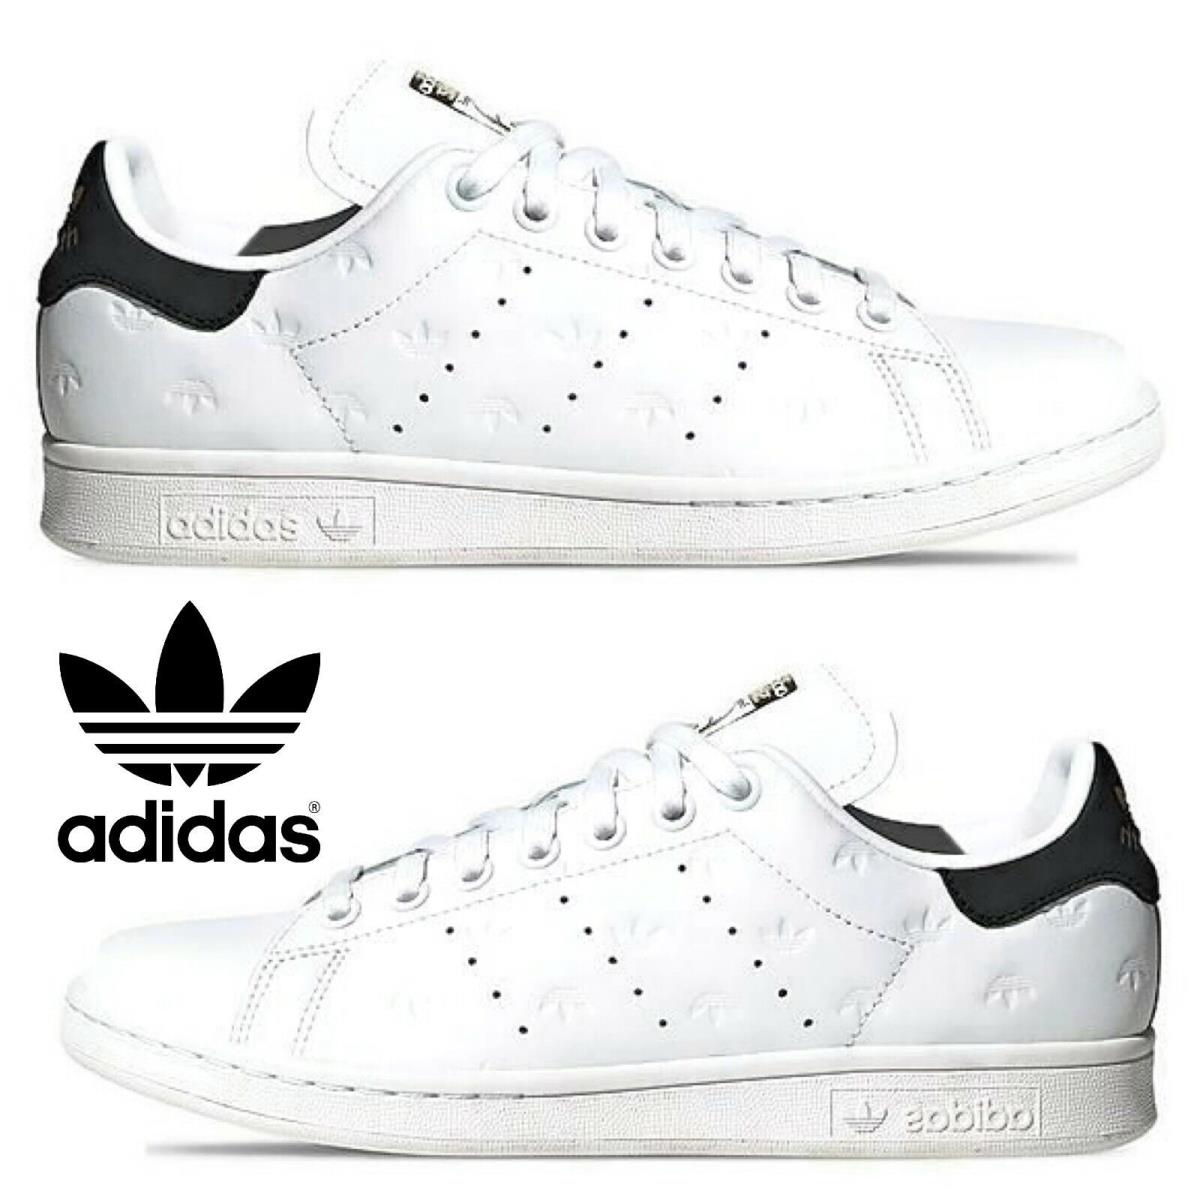 Adidas Originals Stan Smith Women s Sneakers Casual Shoes Sport Gym White Black